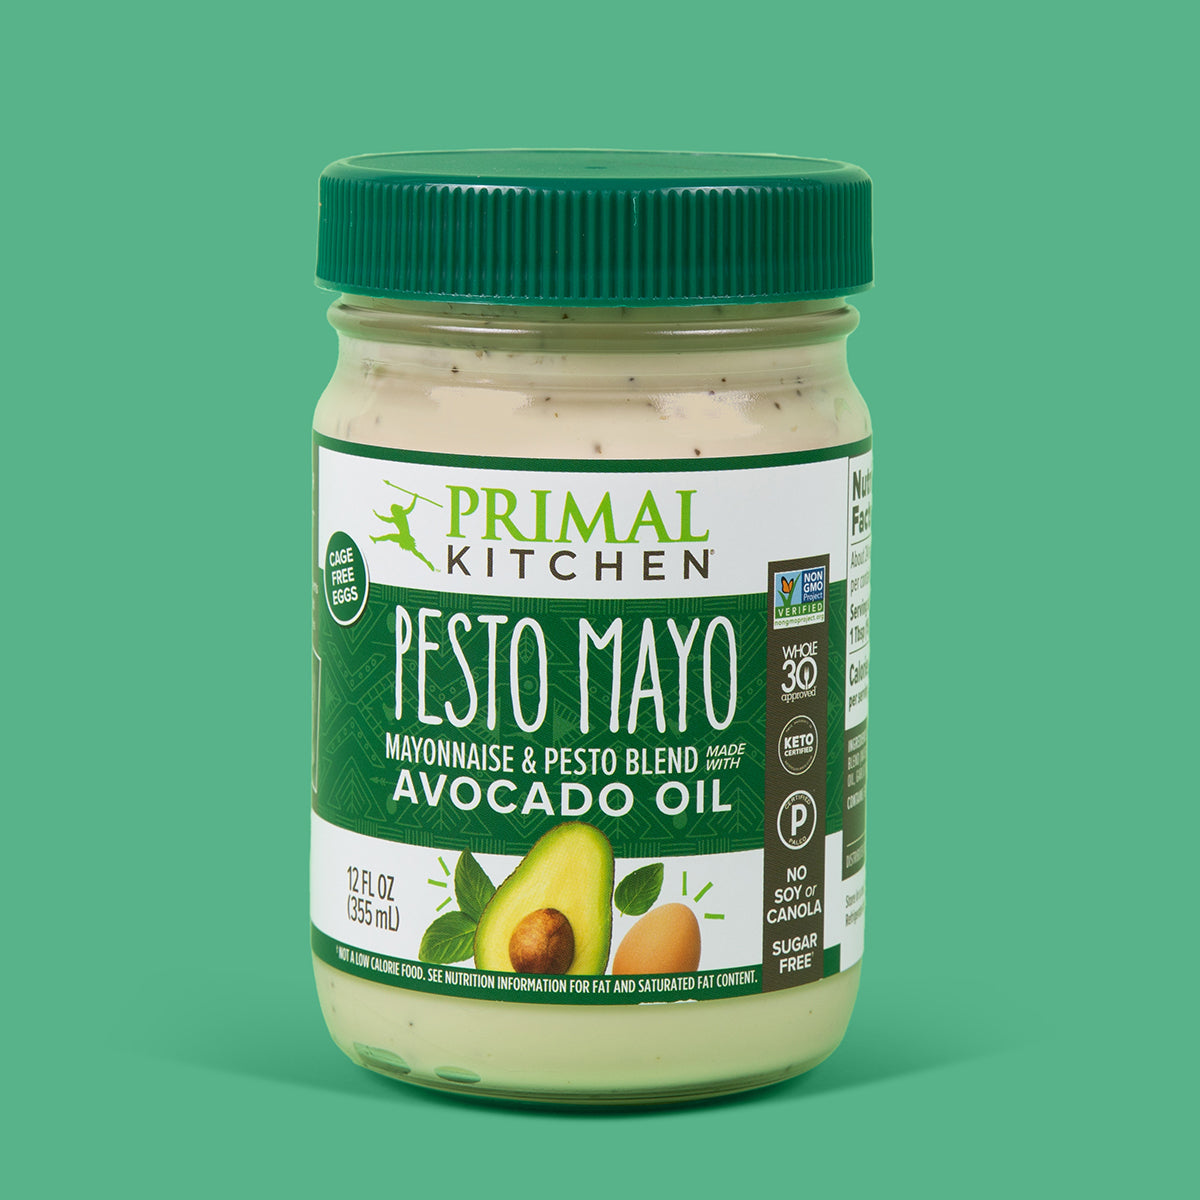 A jar of Primal Kitchen Pesto Mayo made with Avocado Oil with a dark green label and lid on a green background.